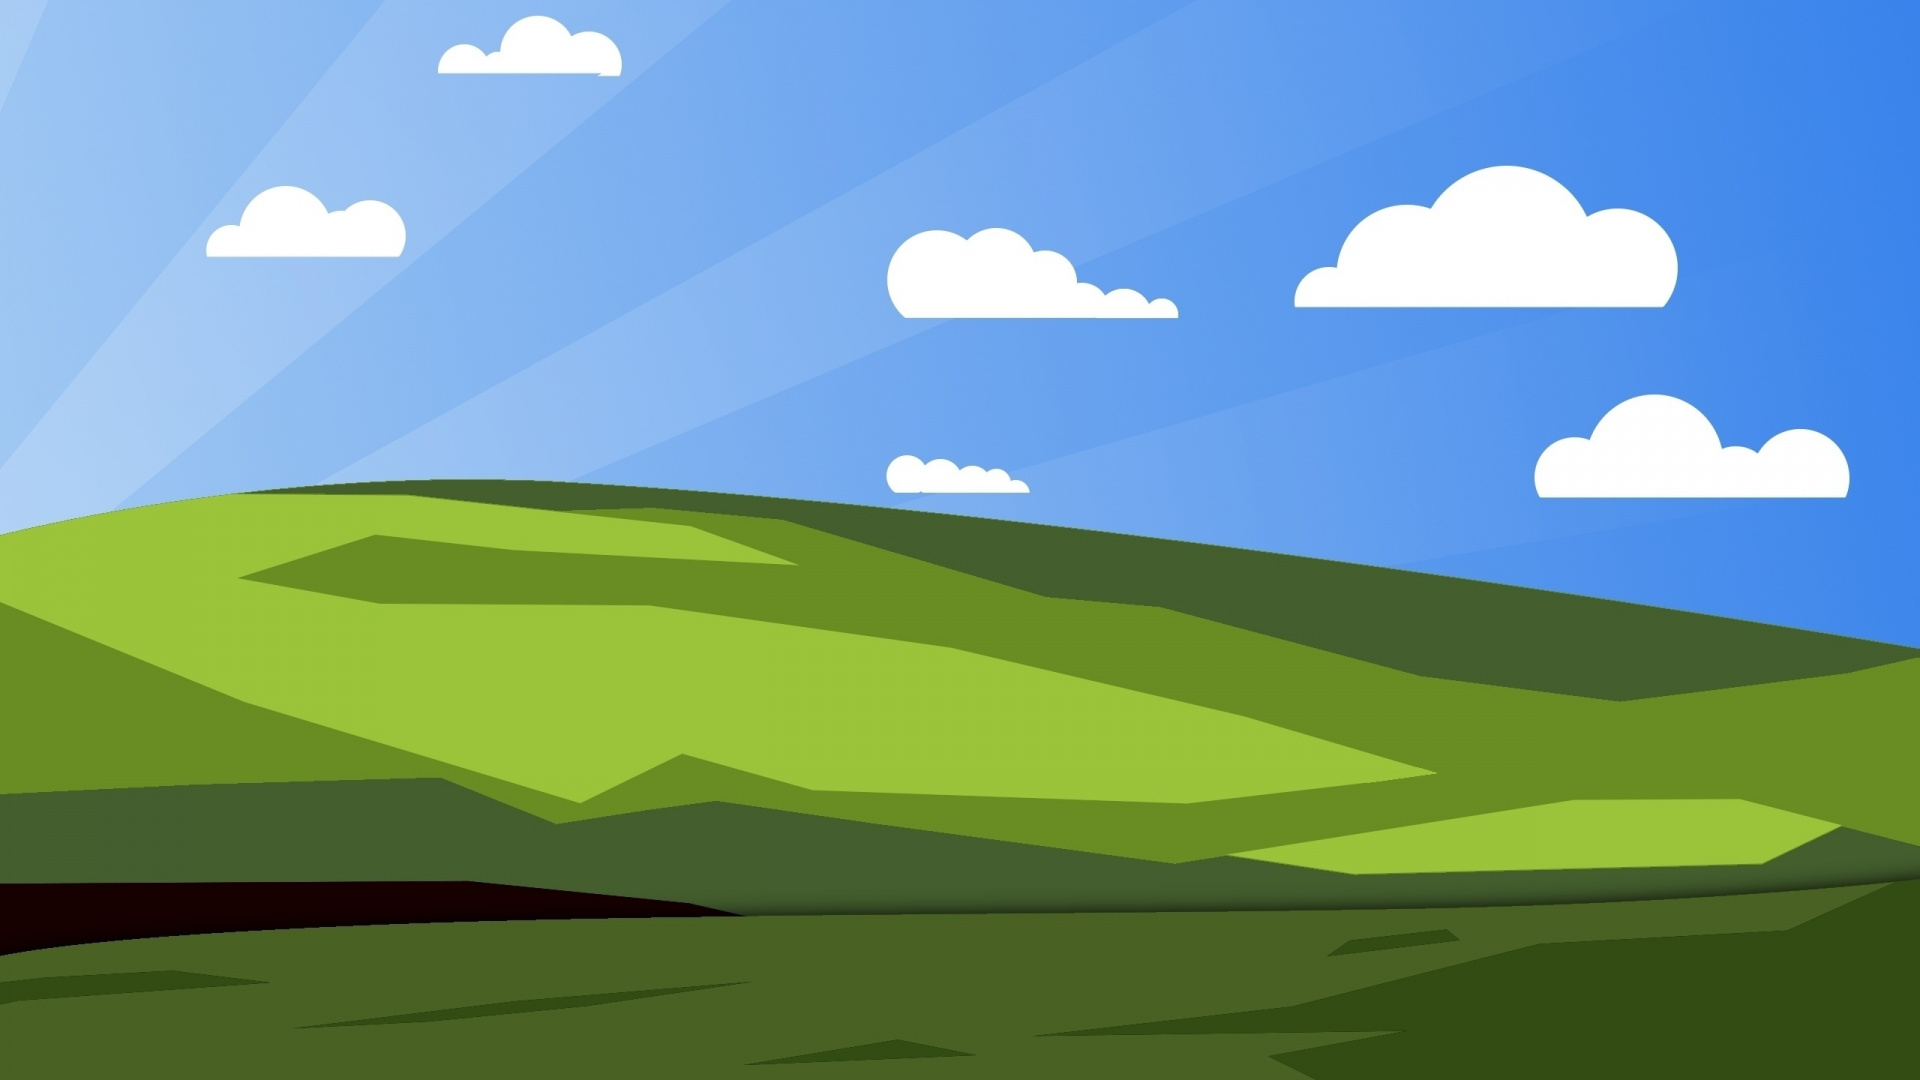 Green Grass Field and Trees Illustration. Wallpaper in 1920x1080 Resolution